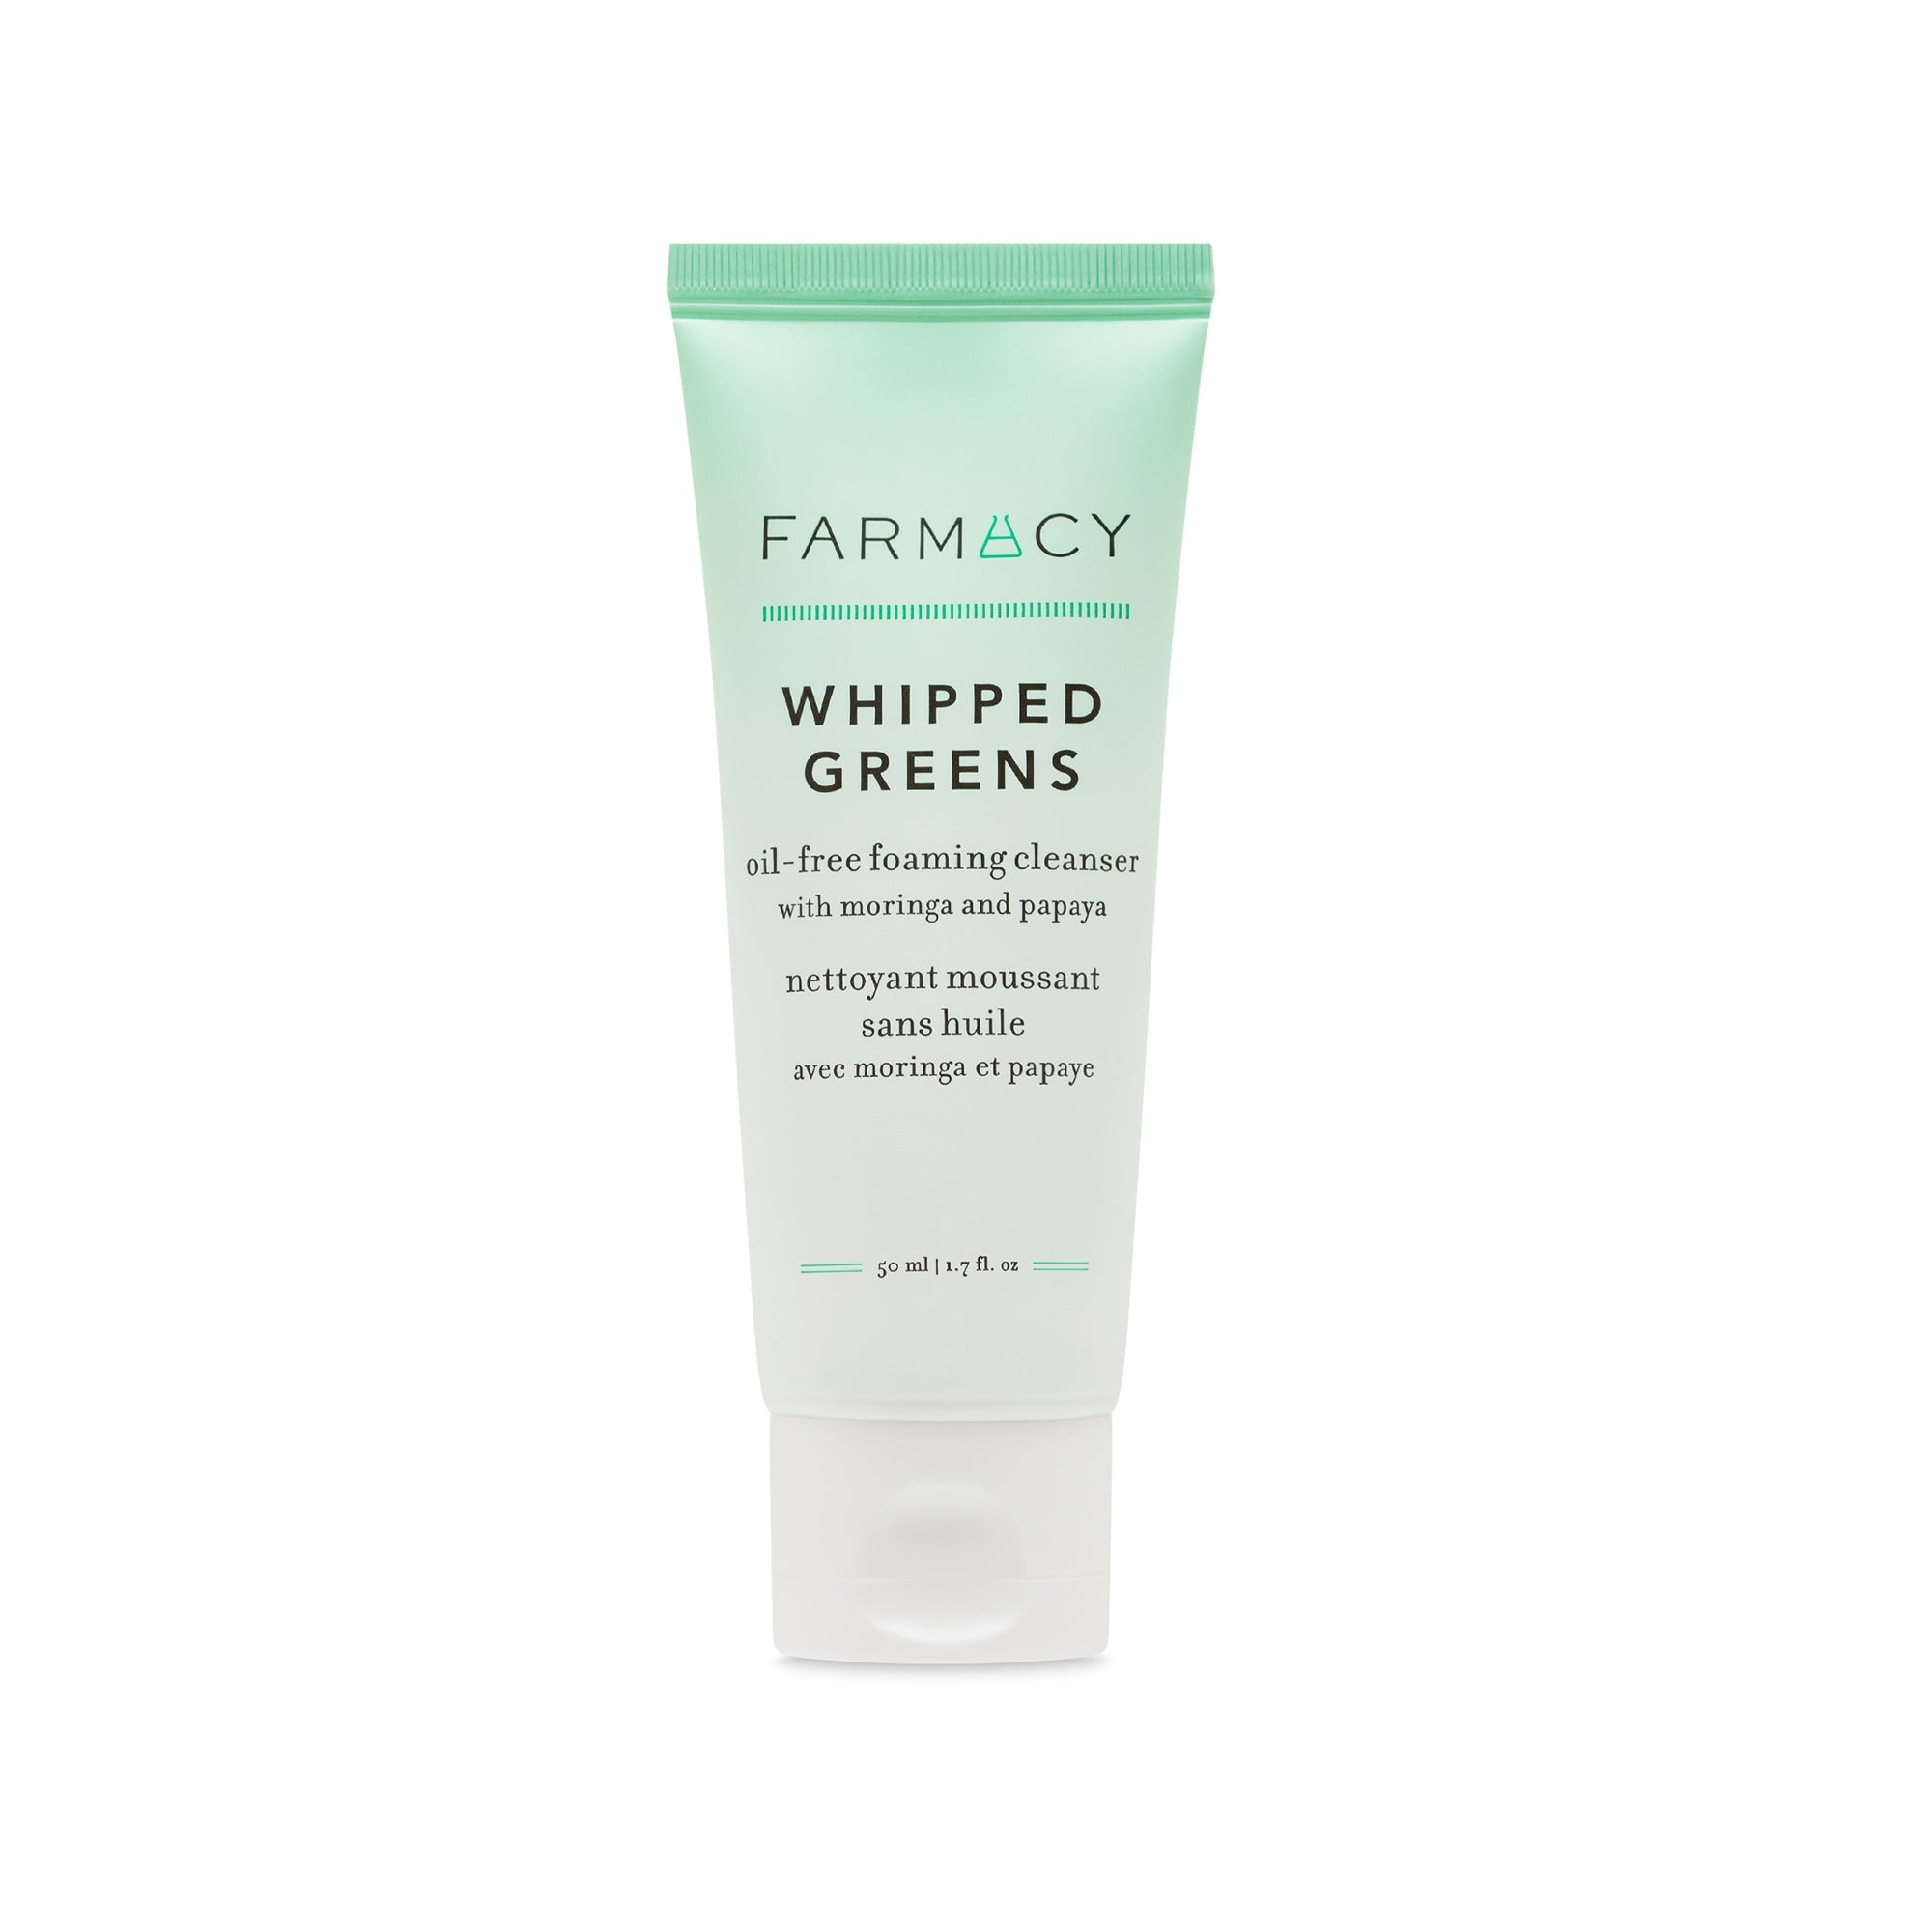 Whipped Greens facial cleanser